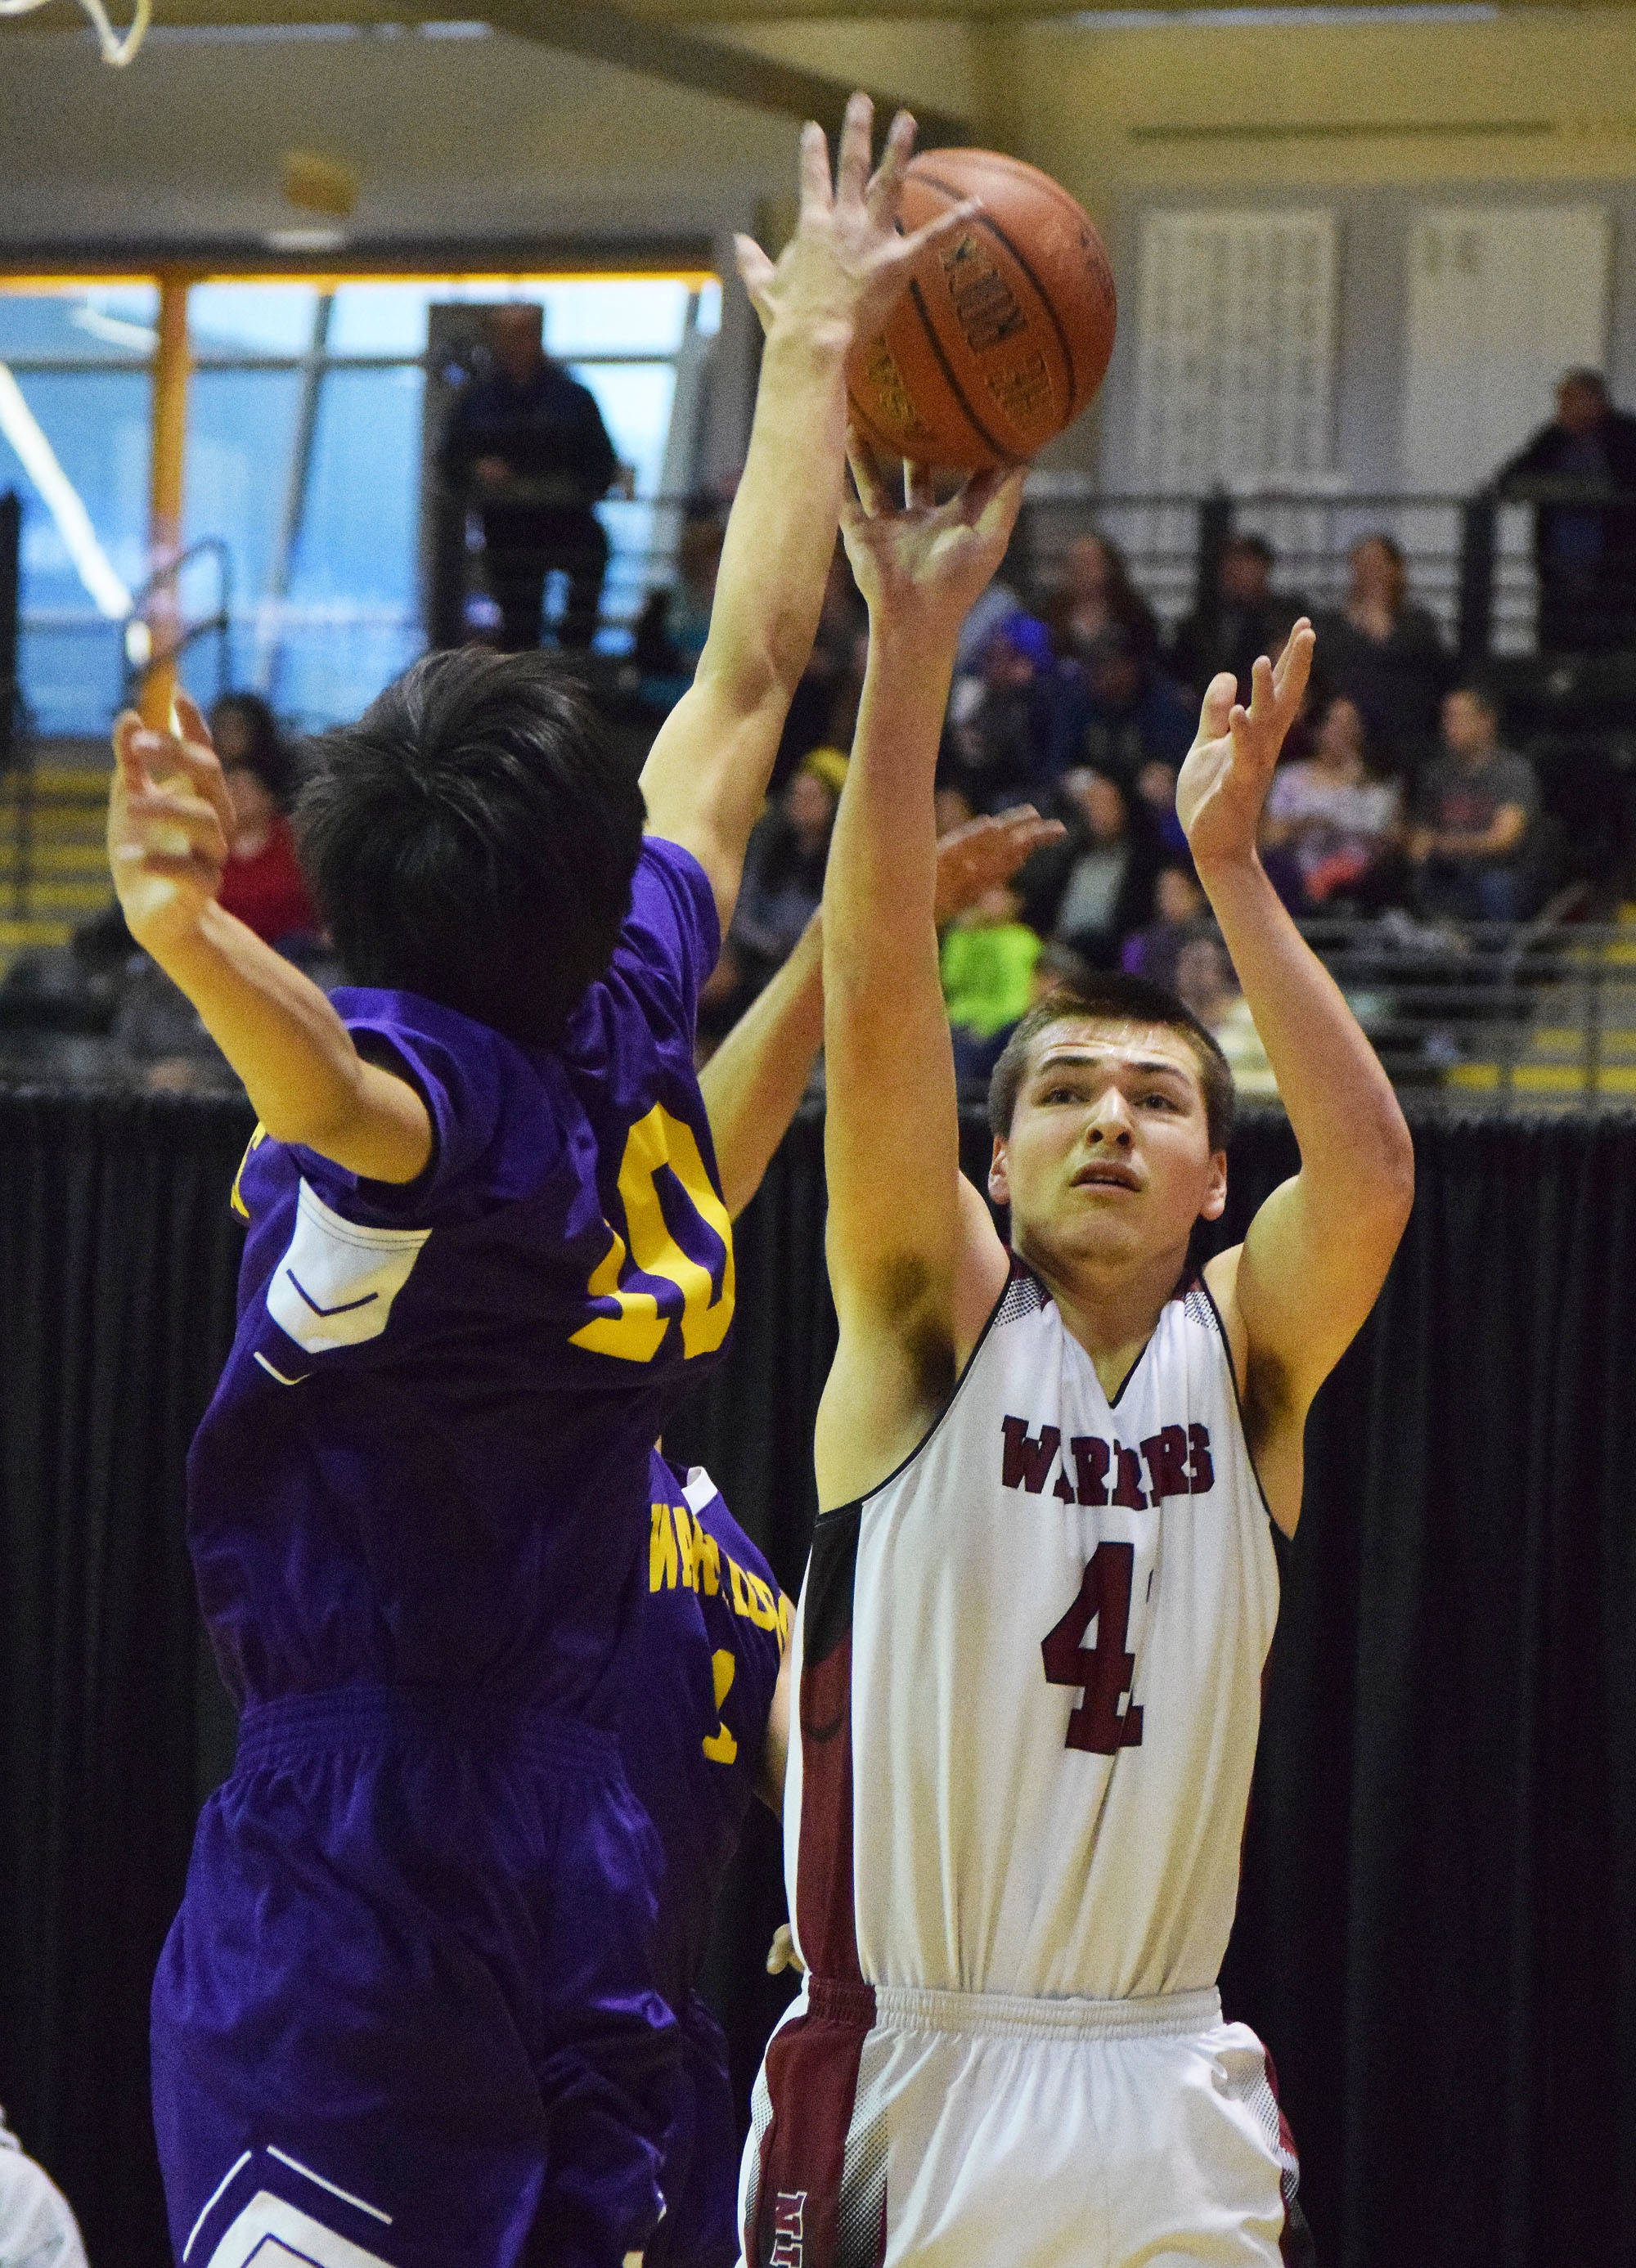 Nikolaevsk’s Michael Trail shoots with Hydaburg defender Mike Eaglestaff blocking Friday, March 17, 2017, at the Class 1A state tournament held at the Alaska Airlines Center in Anchorage. (Photo by Joey Klecka/Peninsula Clarion)